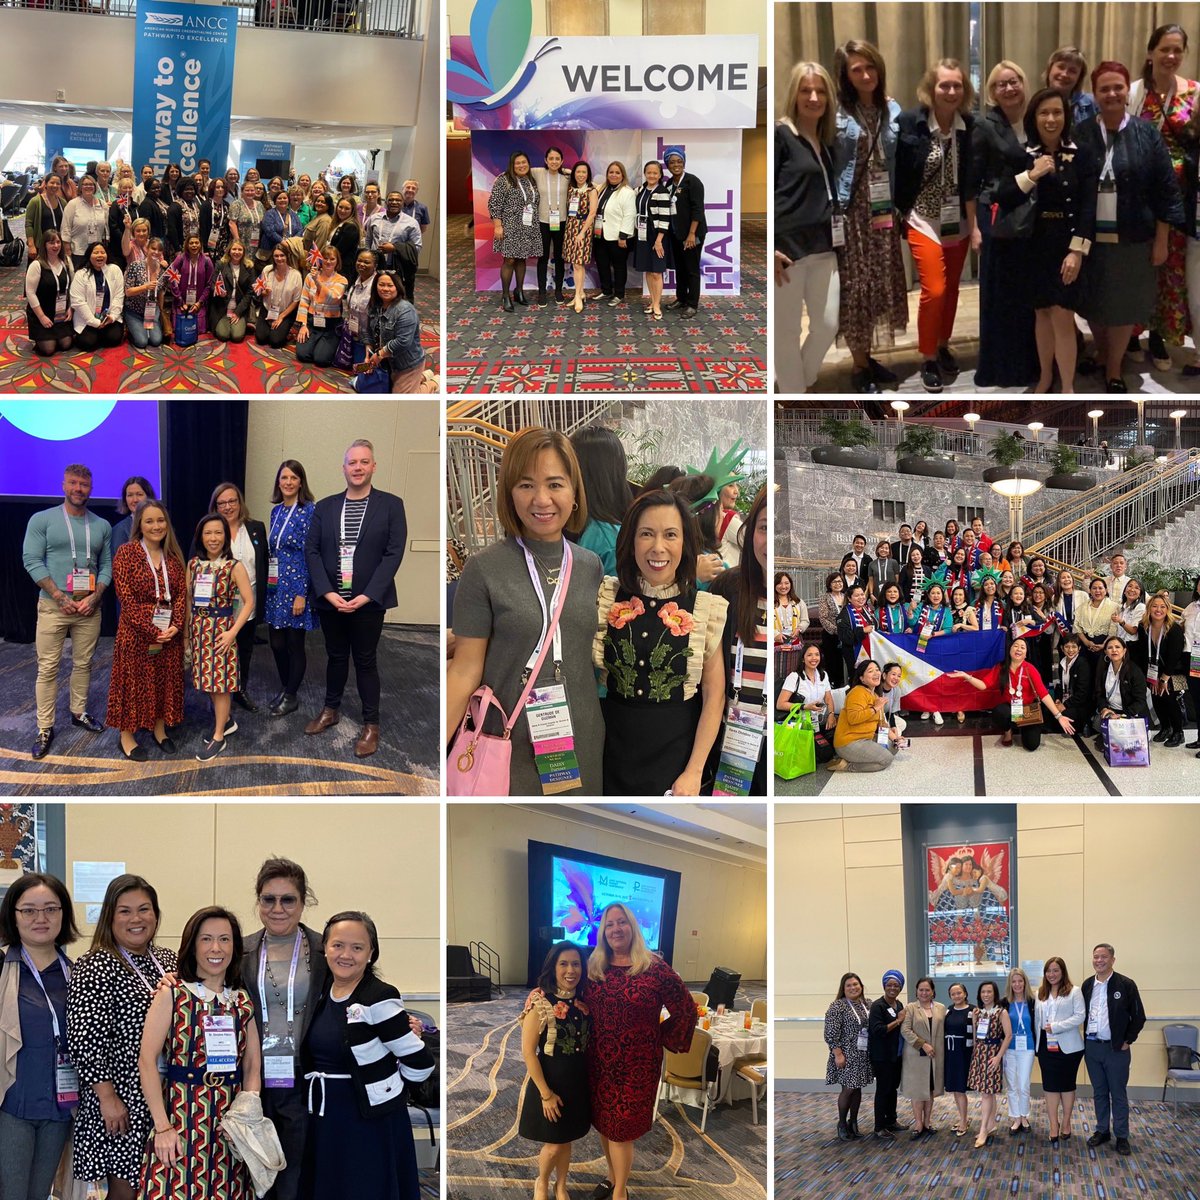 Connecting with attendees from 26 different countries who share our passion for #nursingexcellence  and creating positive practice
environments 💙💚
#ANCCPathway #ANCCMagnet